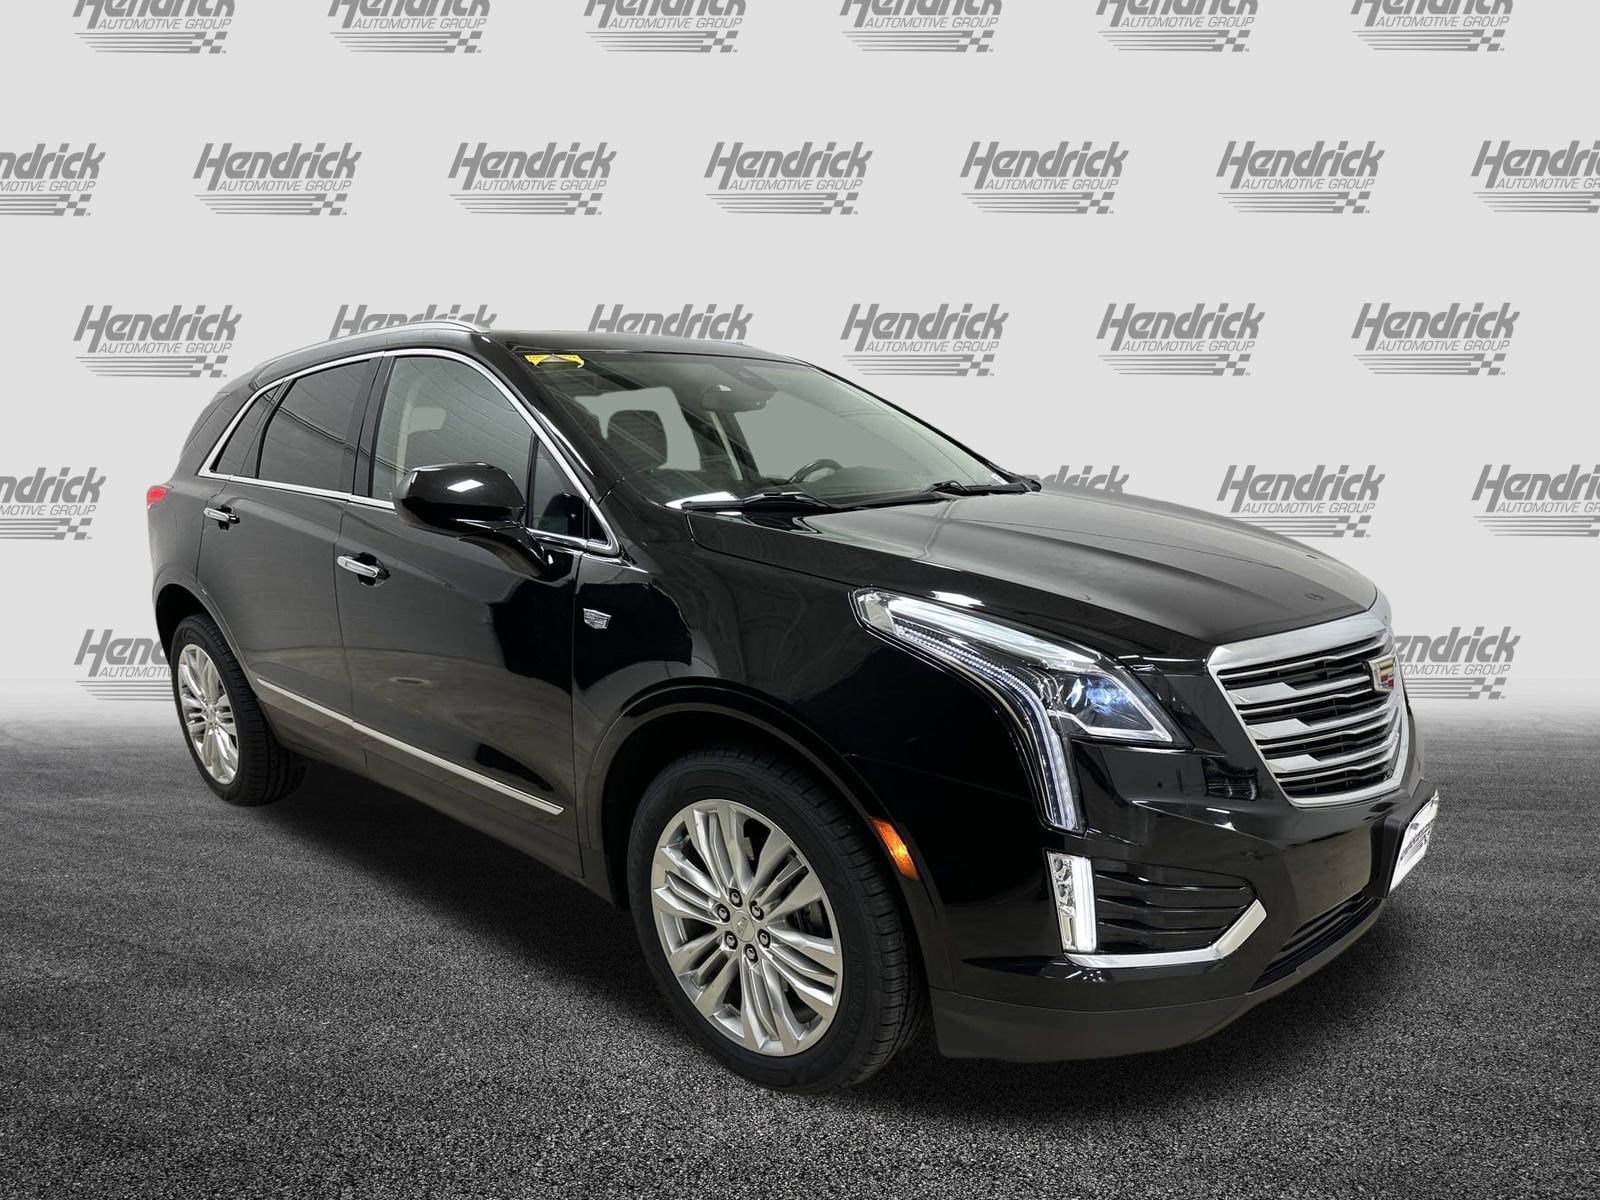 Used 2019 Cadillac XT5 Premium Luxury with VIN 1GYKNERS4KZ116337 for sale in Kansas City